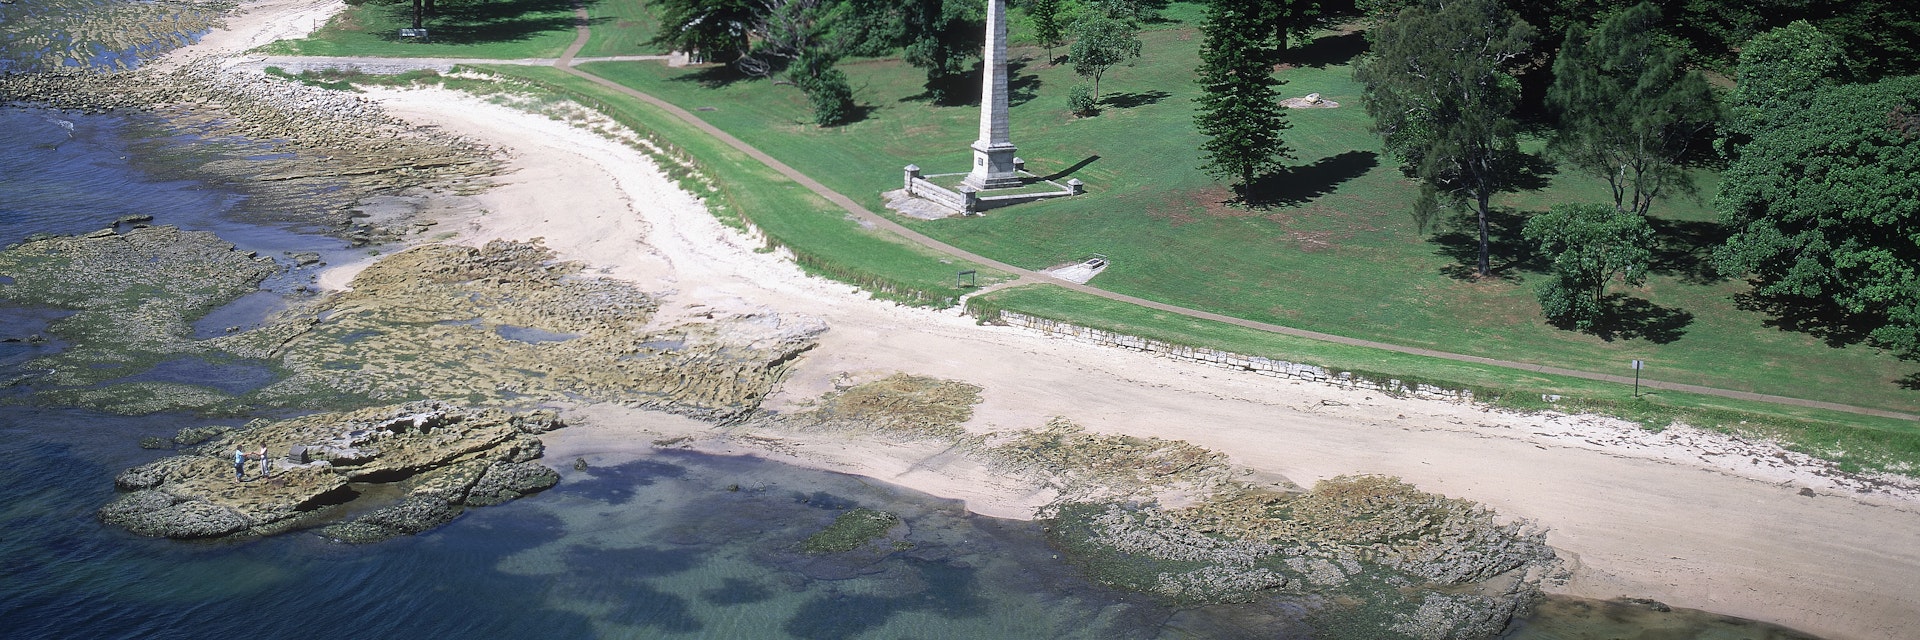 aerial view over captain cooks landing place, kurnell, sydney